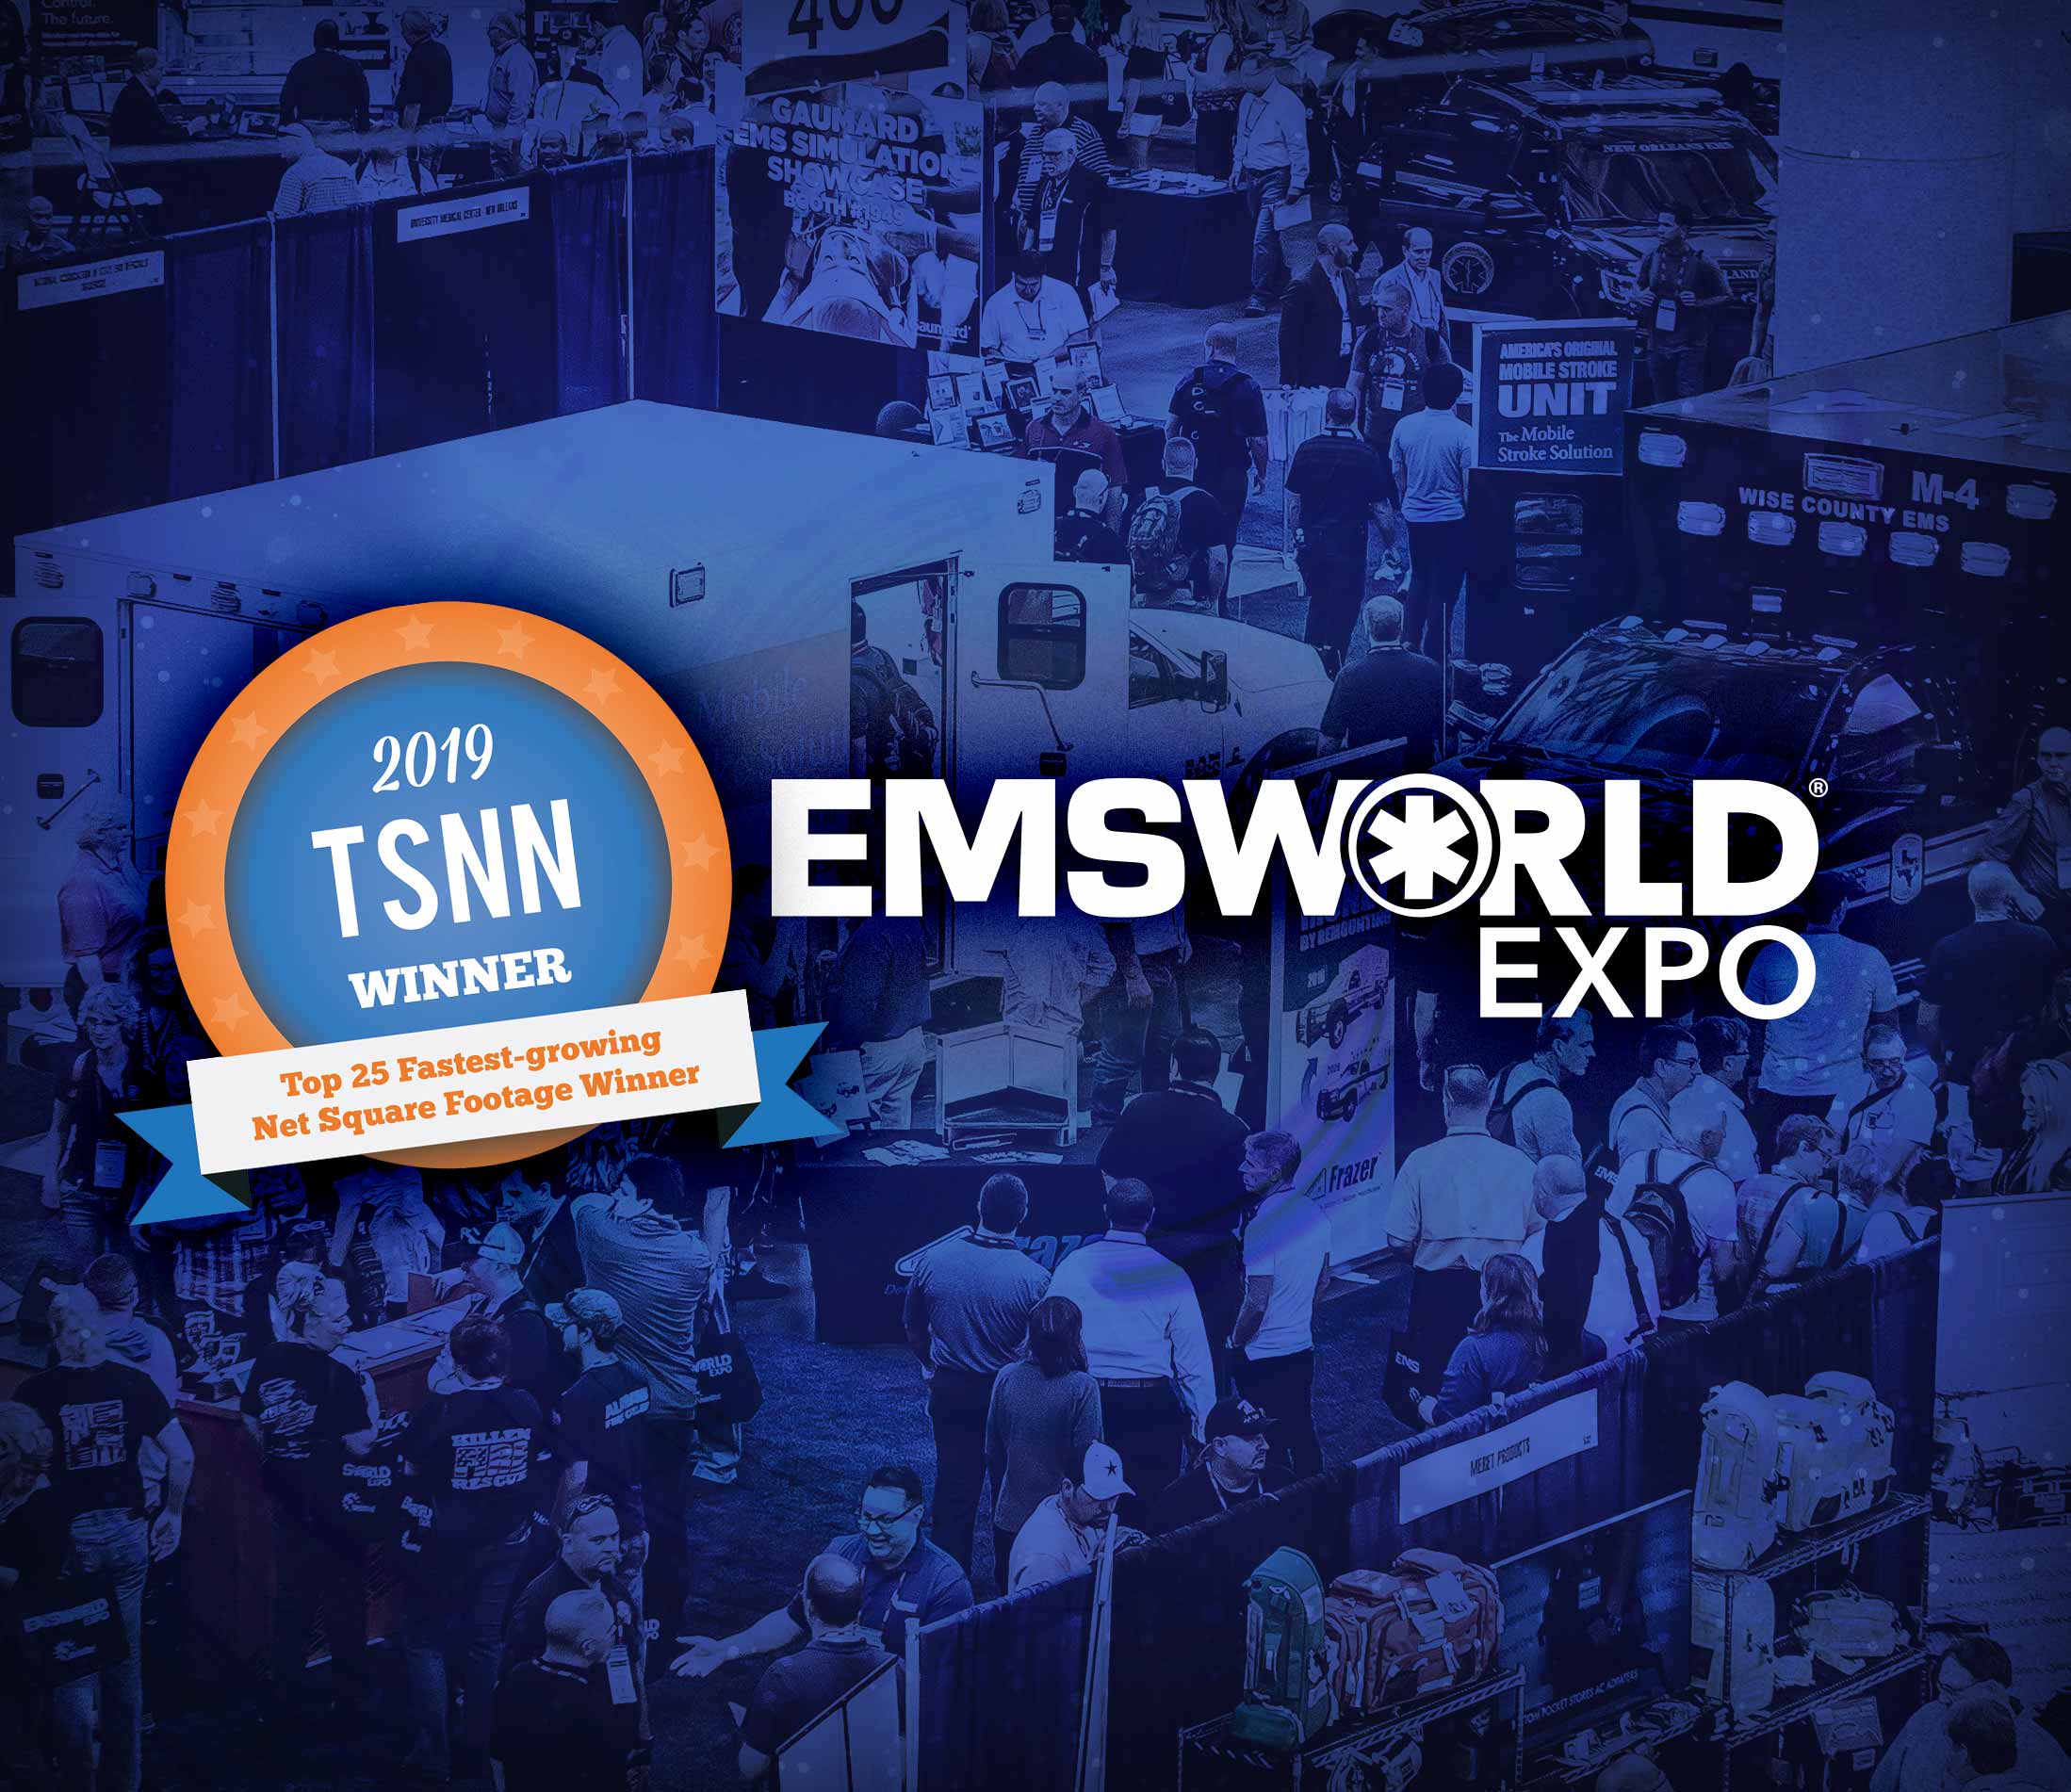 HMP’s EMS World Expo Recognized as one of the “Top 25 FastestGrowing